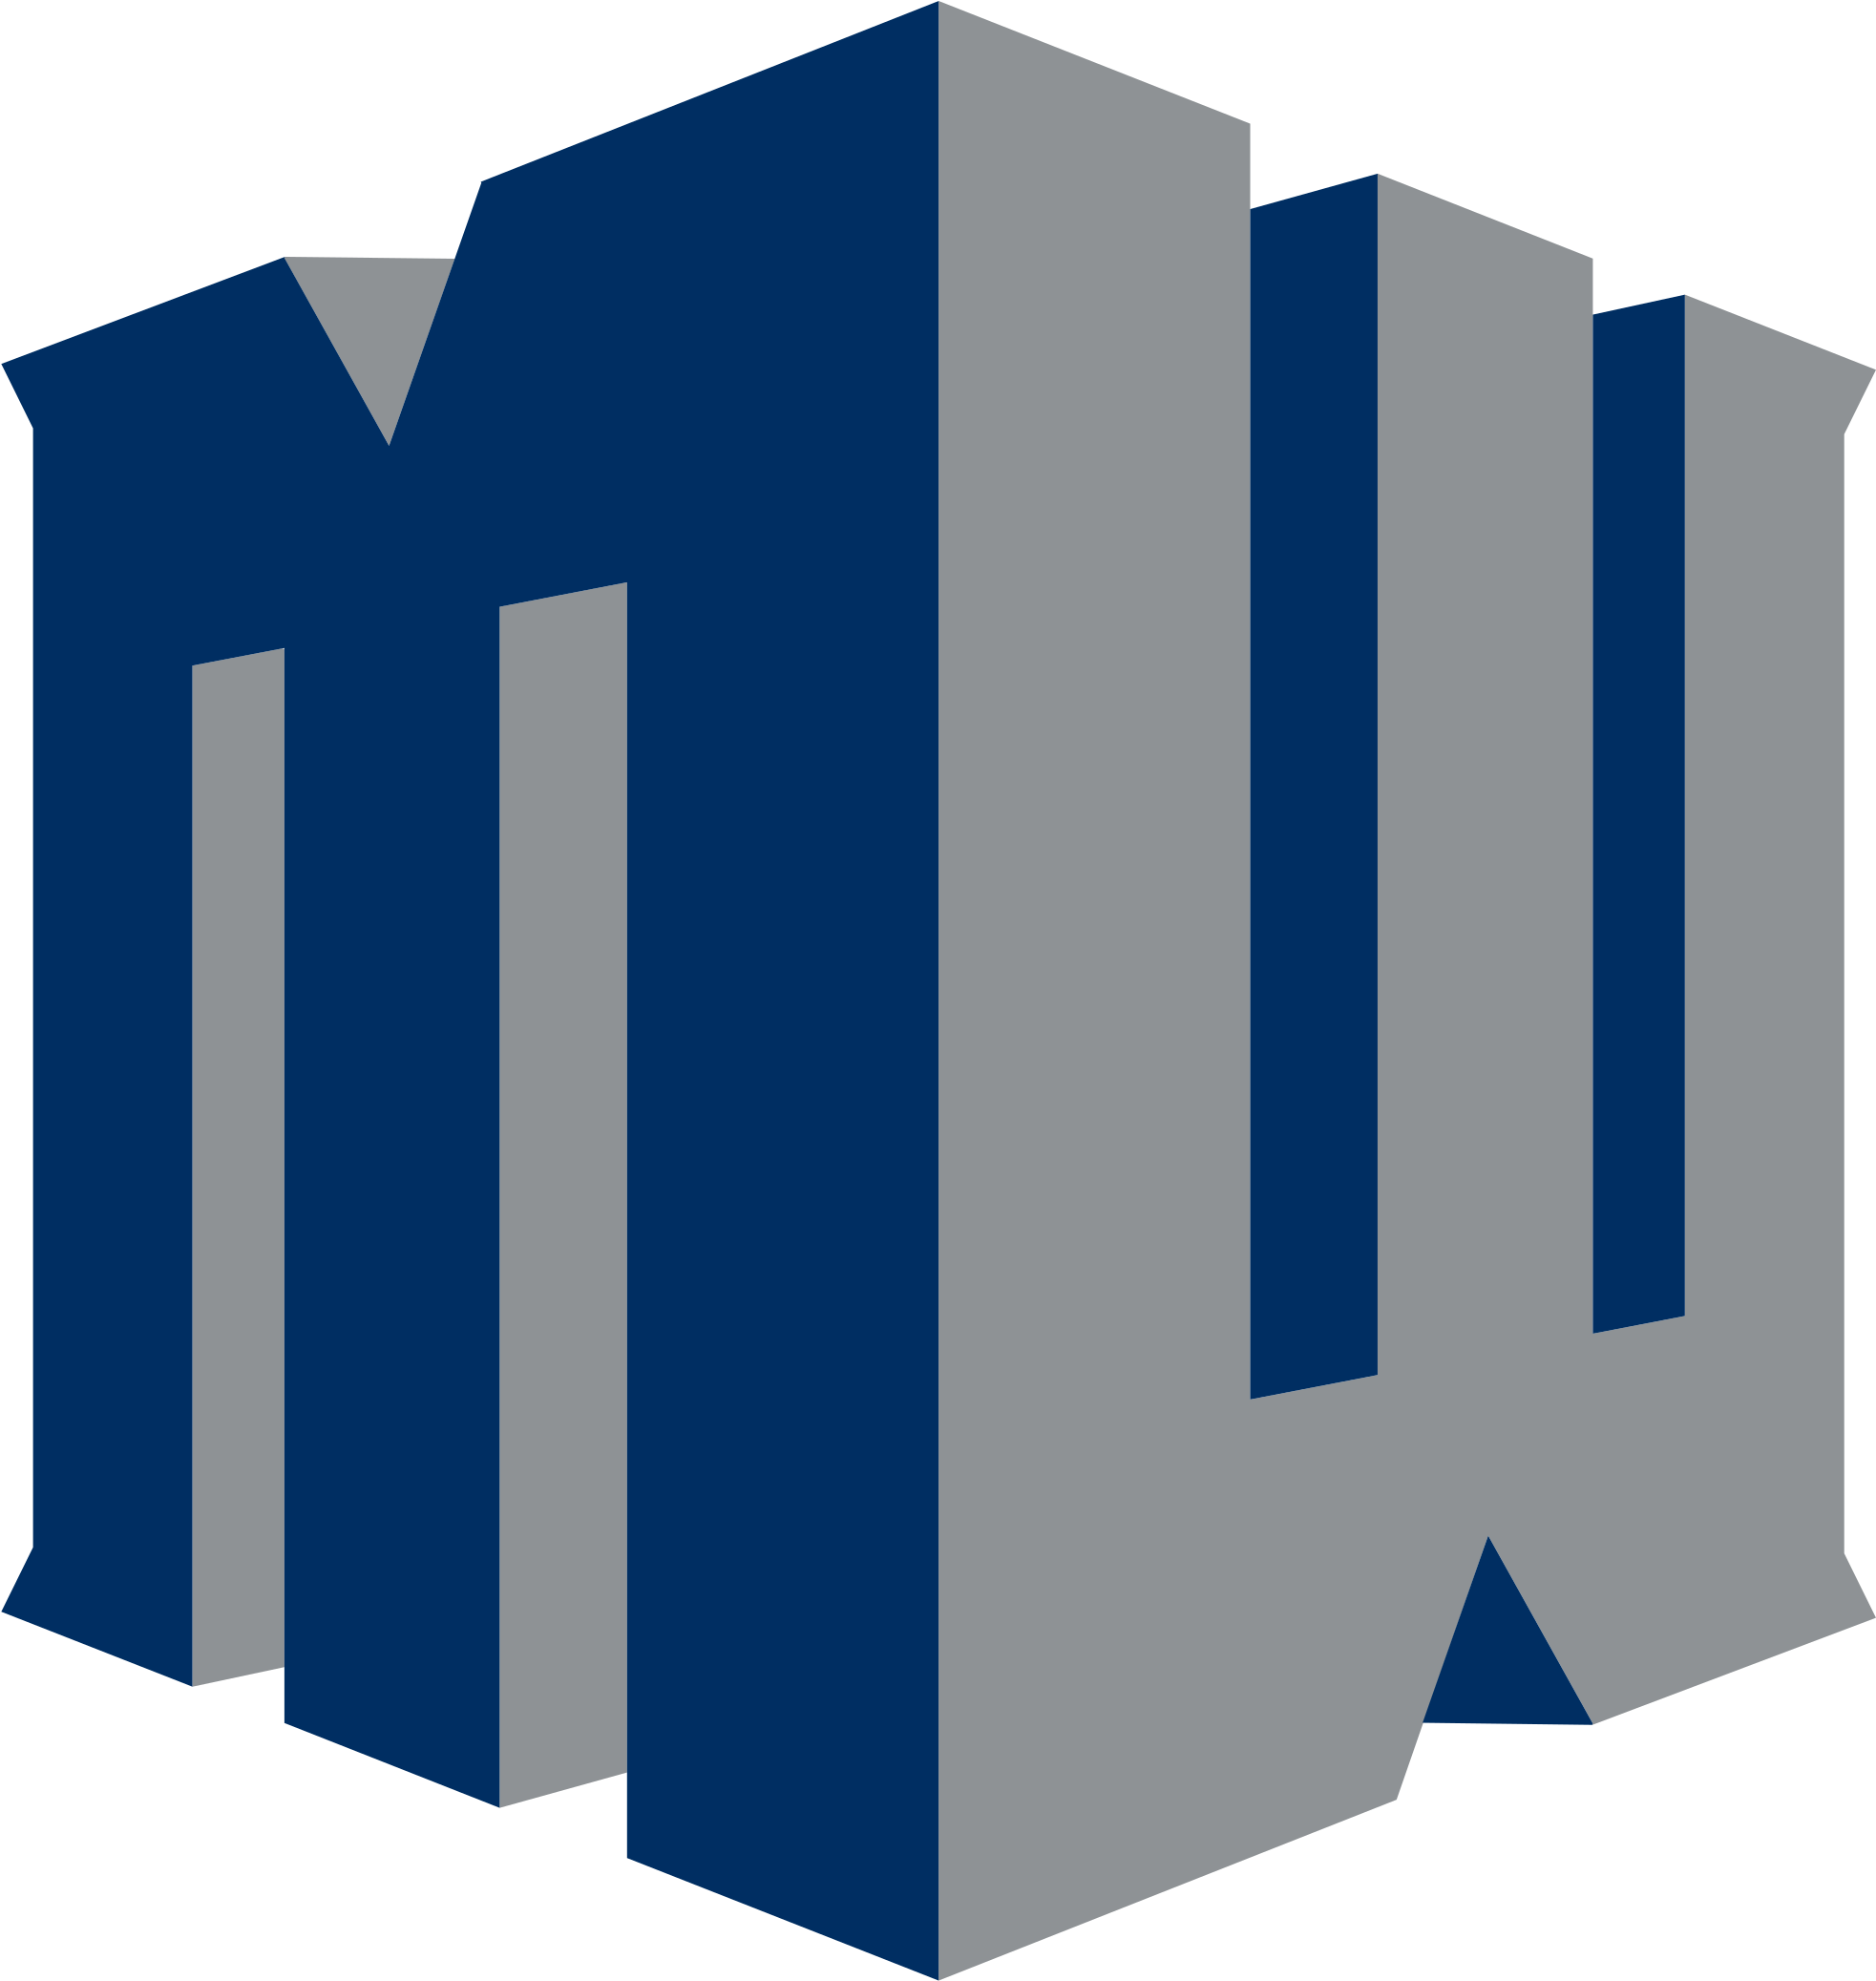 Nevada Is A Member Of The Mountain West Conference - Mountain West Conference Logo (2000x2109)